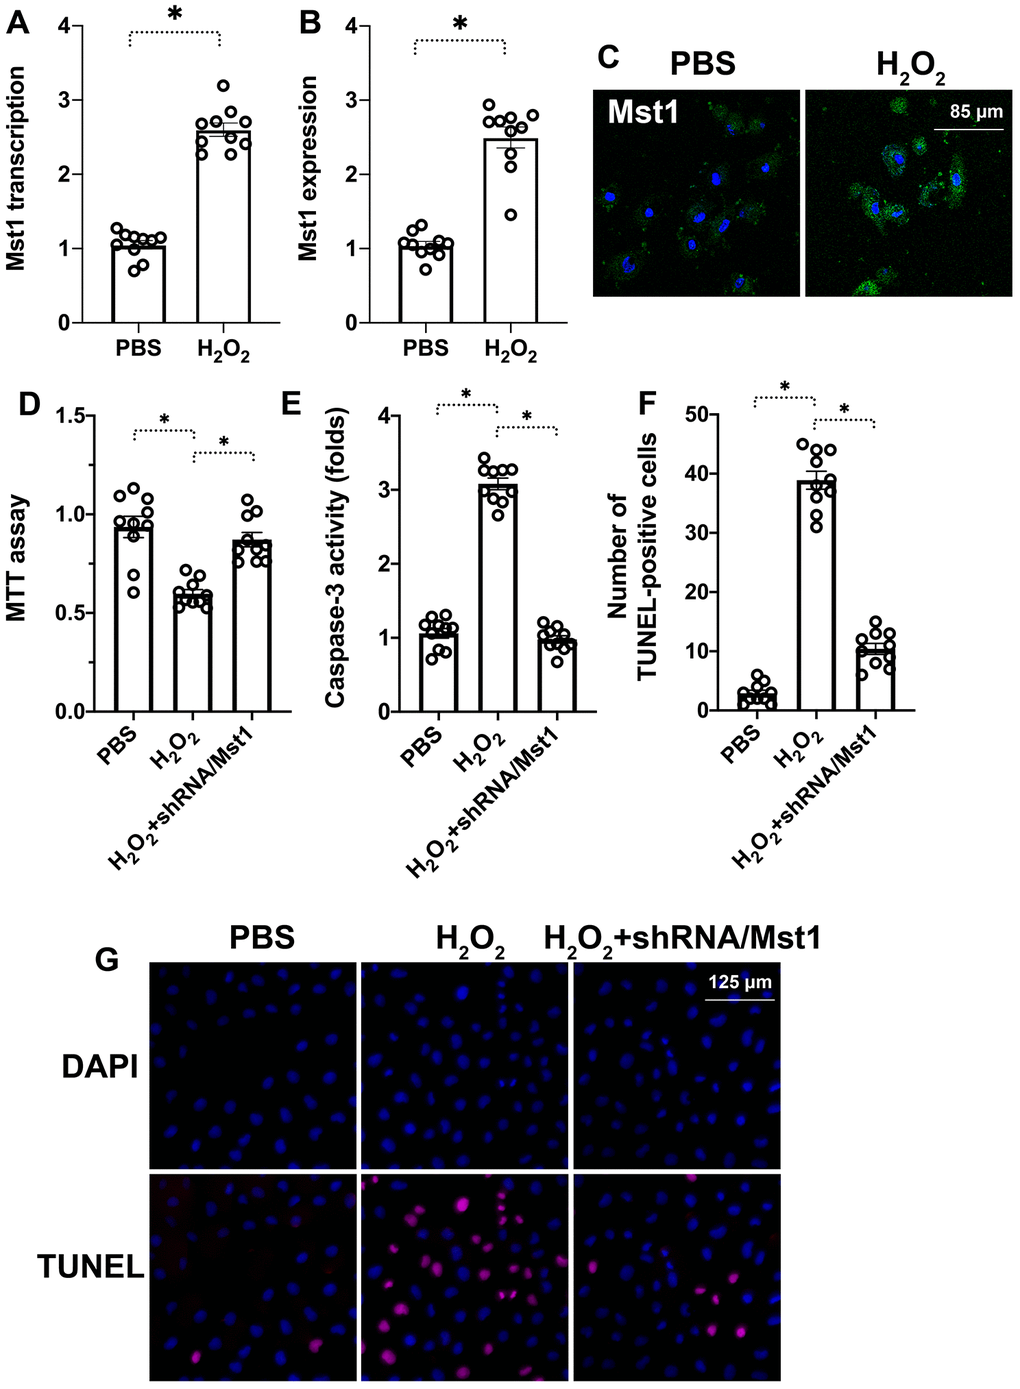 Mst1 promotes apoptosis in oxidative stress-induced RA-FLSs. (A) QRT-PCR analysis shows Mst1 mRNA levels in the control and H2O2-treated RA-FLSs. (B) Representative immunofluorescence images show Mst1 protein expression in control and H2O2-treated RA-FLSs (C) Quantitative estimation of relative Mst1 protein levels in control and H2O2-treated RA-FLSs based on the immunofluorescence assay. (D) MTT assay results show the viability of control and Mst1 knockdown RA-FLSs treated with or without H2O2. (E) ELISA assay results show caspase-3 activity in the control and H2O2-treated RA-FLSs. (F) Representative images show TUNEL staining of the control and H2O2-treated RA-FLSs. (G) Quantification of percent TUNEL-positive (apoptotic) cells in the control and H2O2-treated RA-FLSs. Note: RA-FLSs were treated with 0.3 mM H2O2 for 6 h; *P